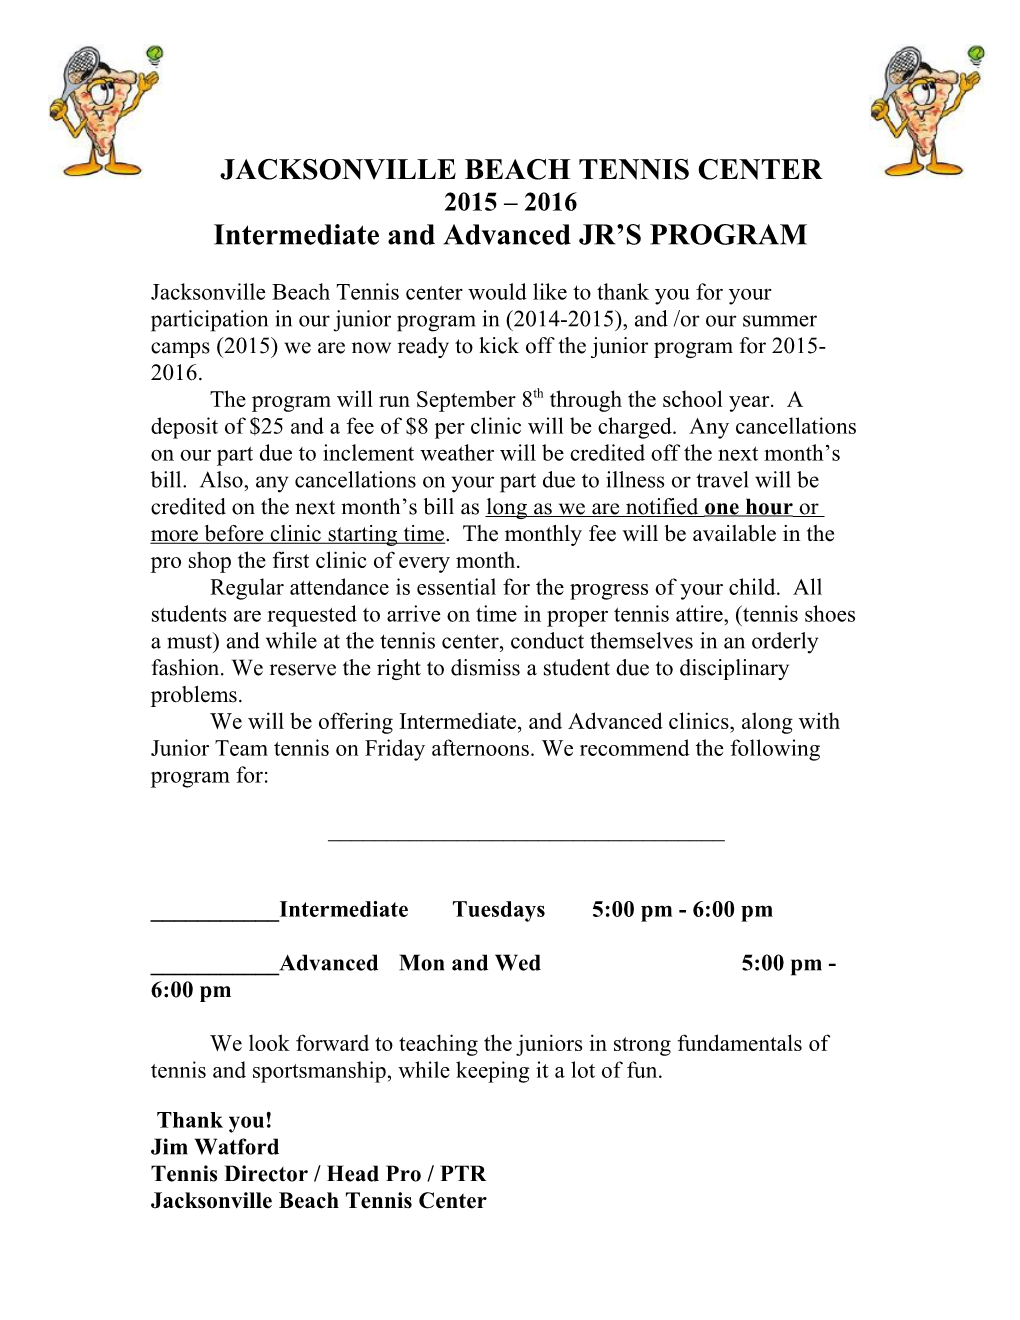 Jacksonville Beach Tennis Center Would Like to Thank You for Your Participation in Either